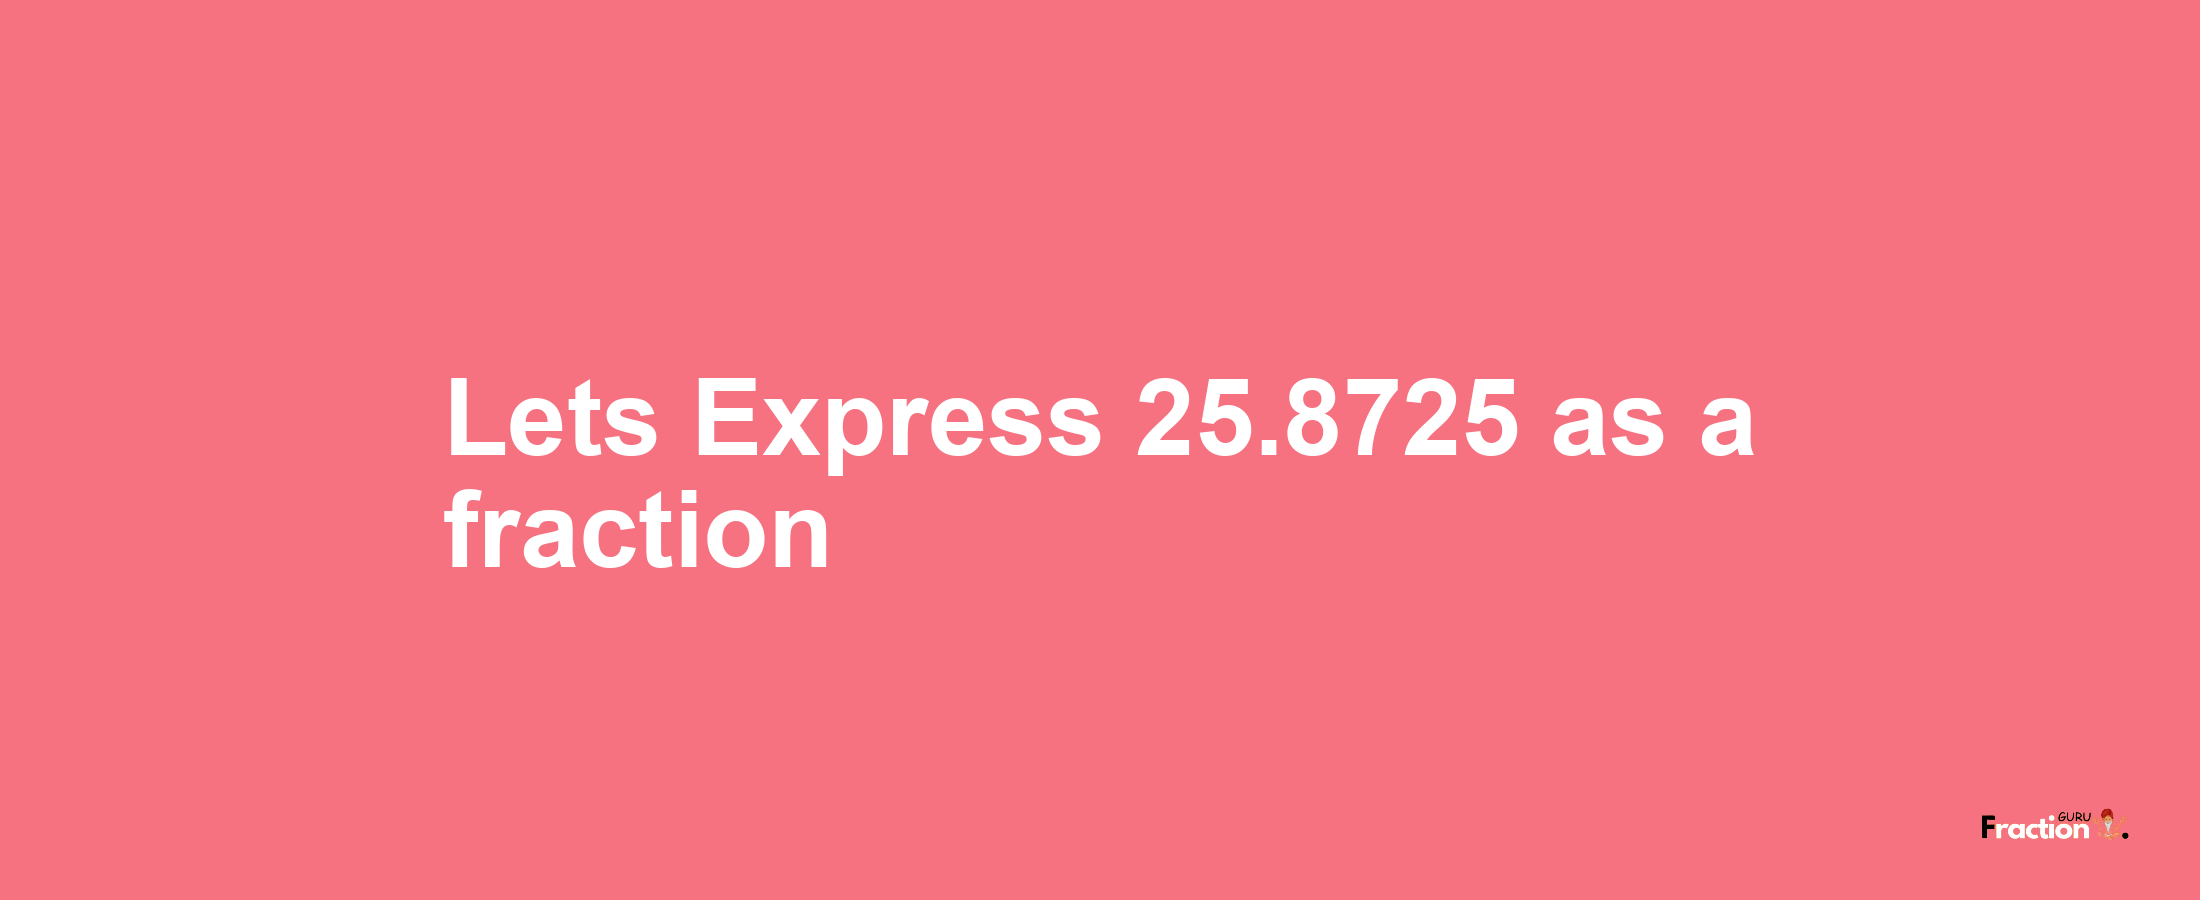 Lets Express 25.8725 as afraction